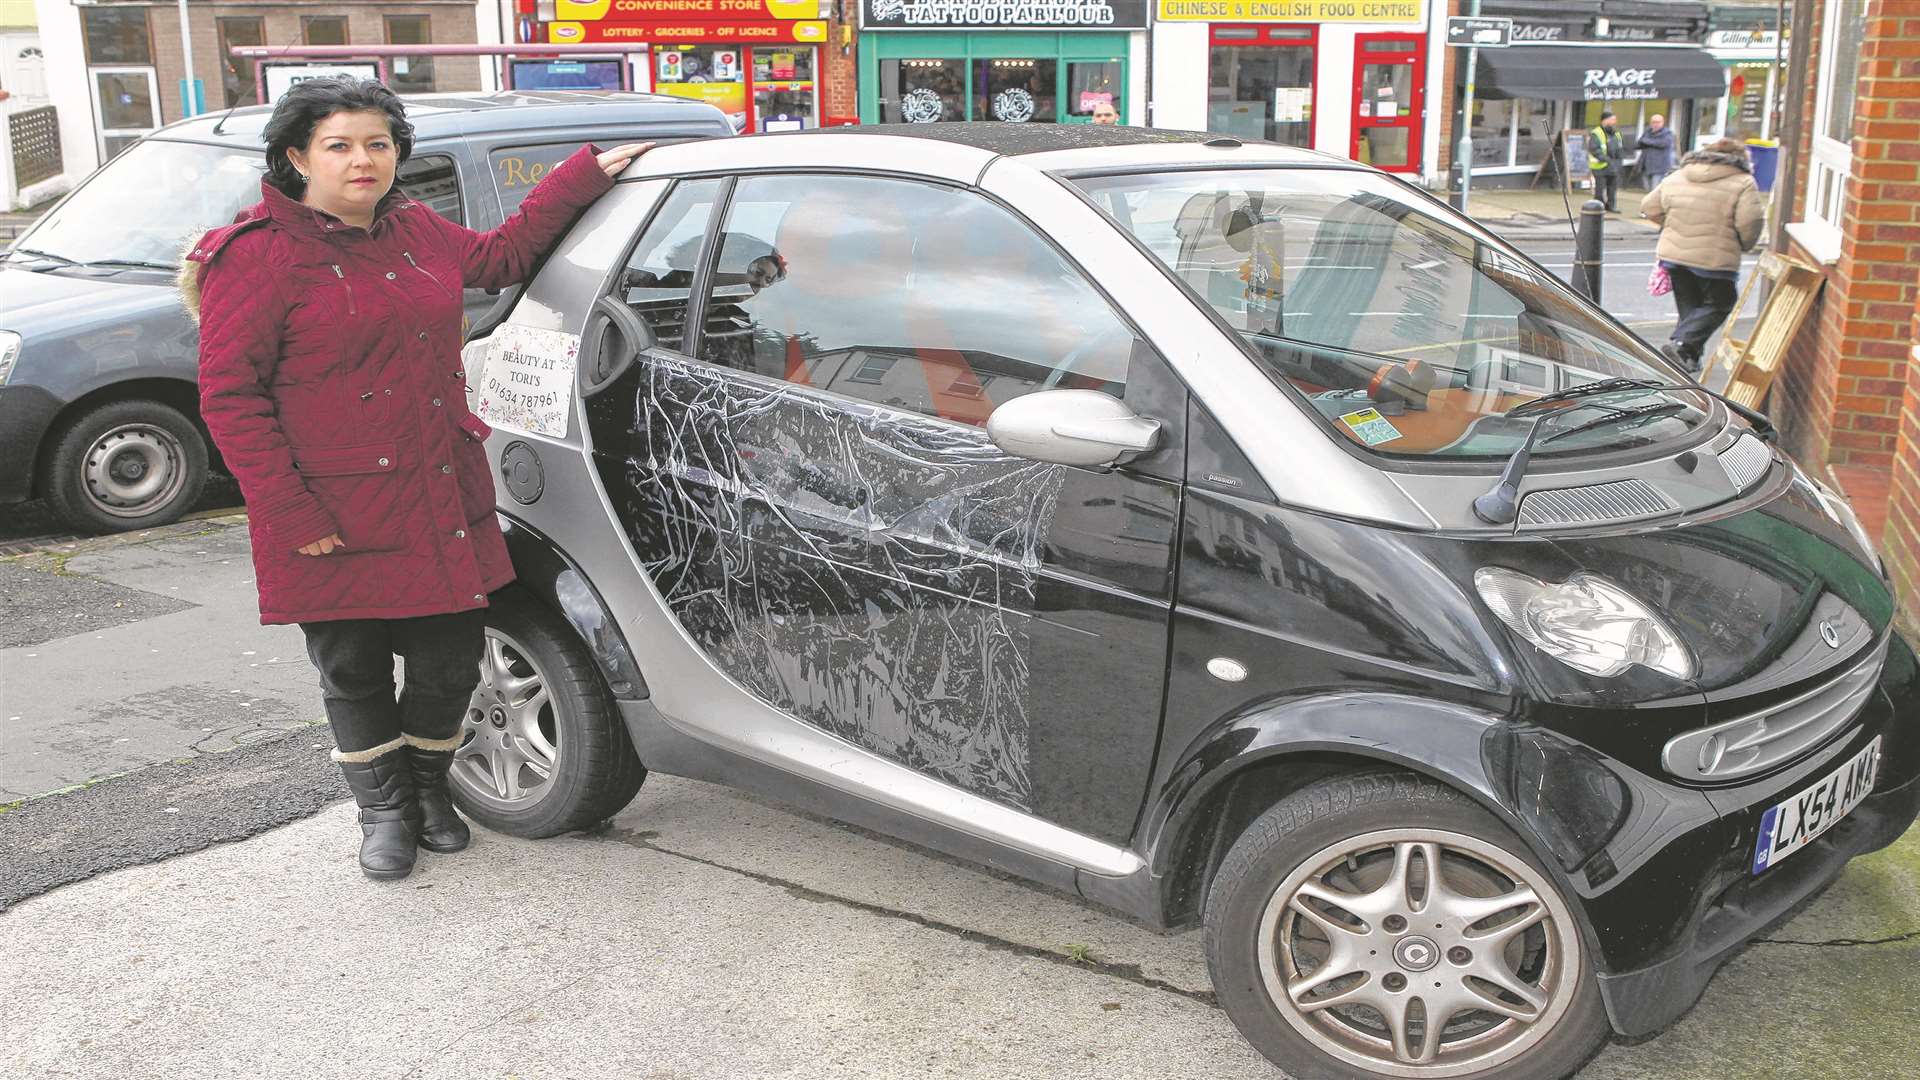 Tori Cobbold with her smart car after the smashed window was replaced.